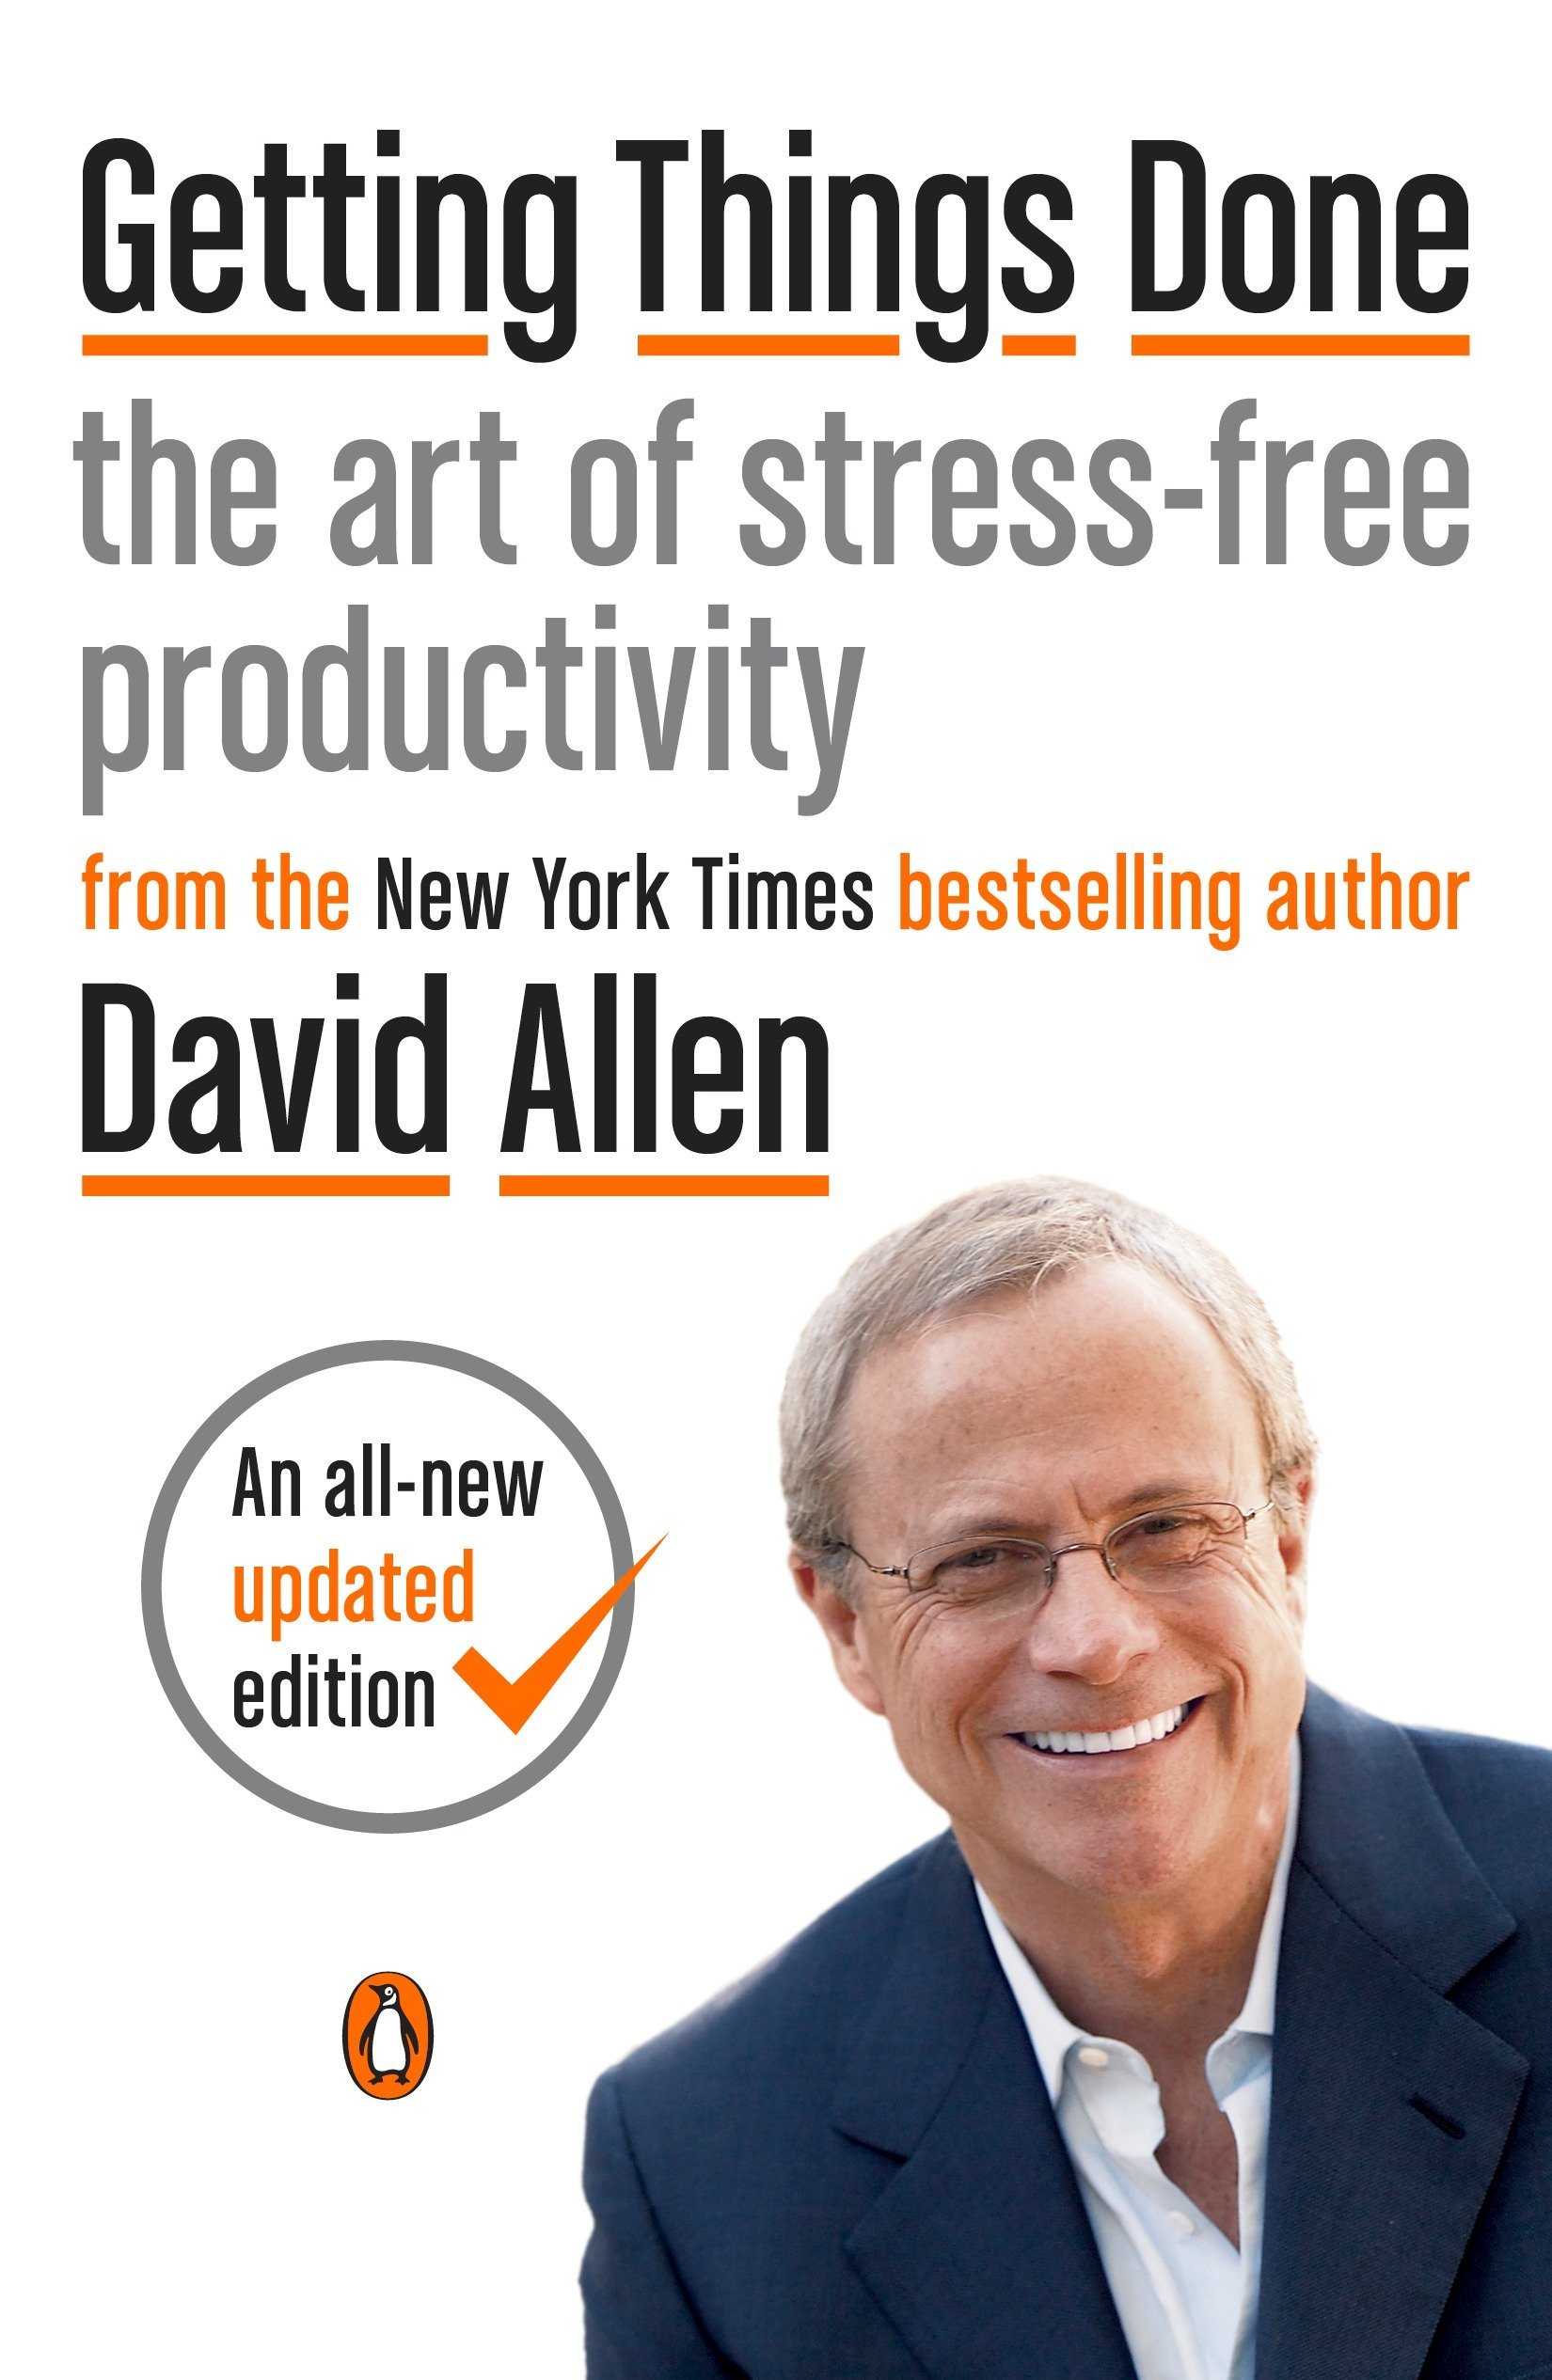 getting things done - David Allen